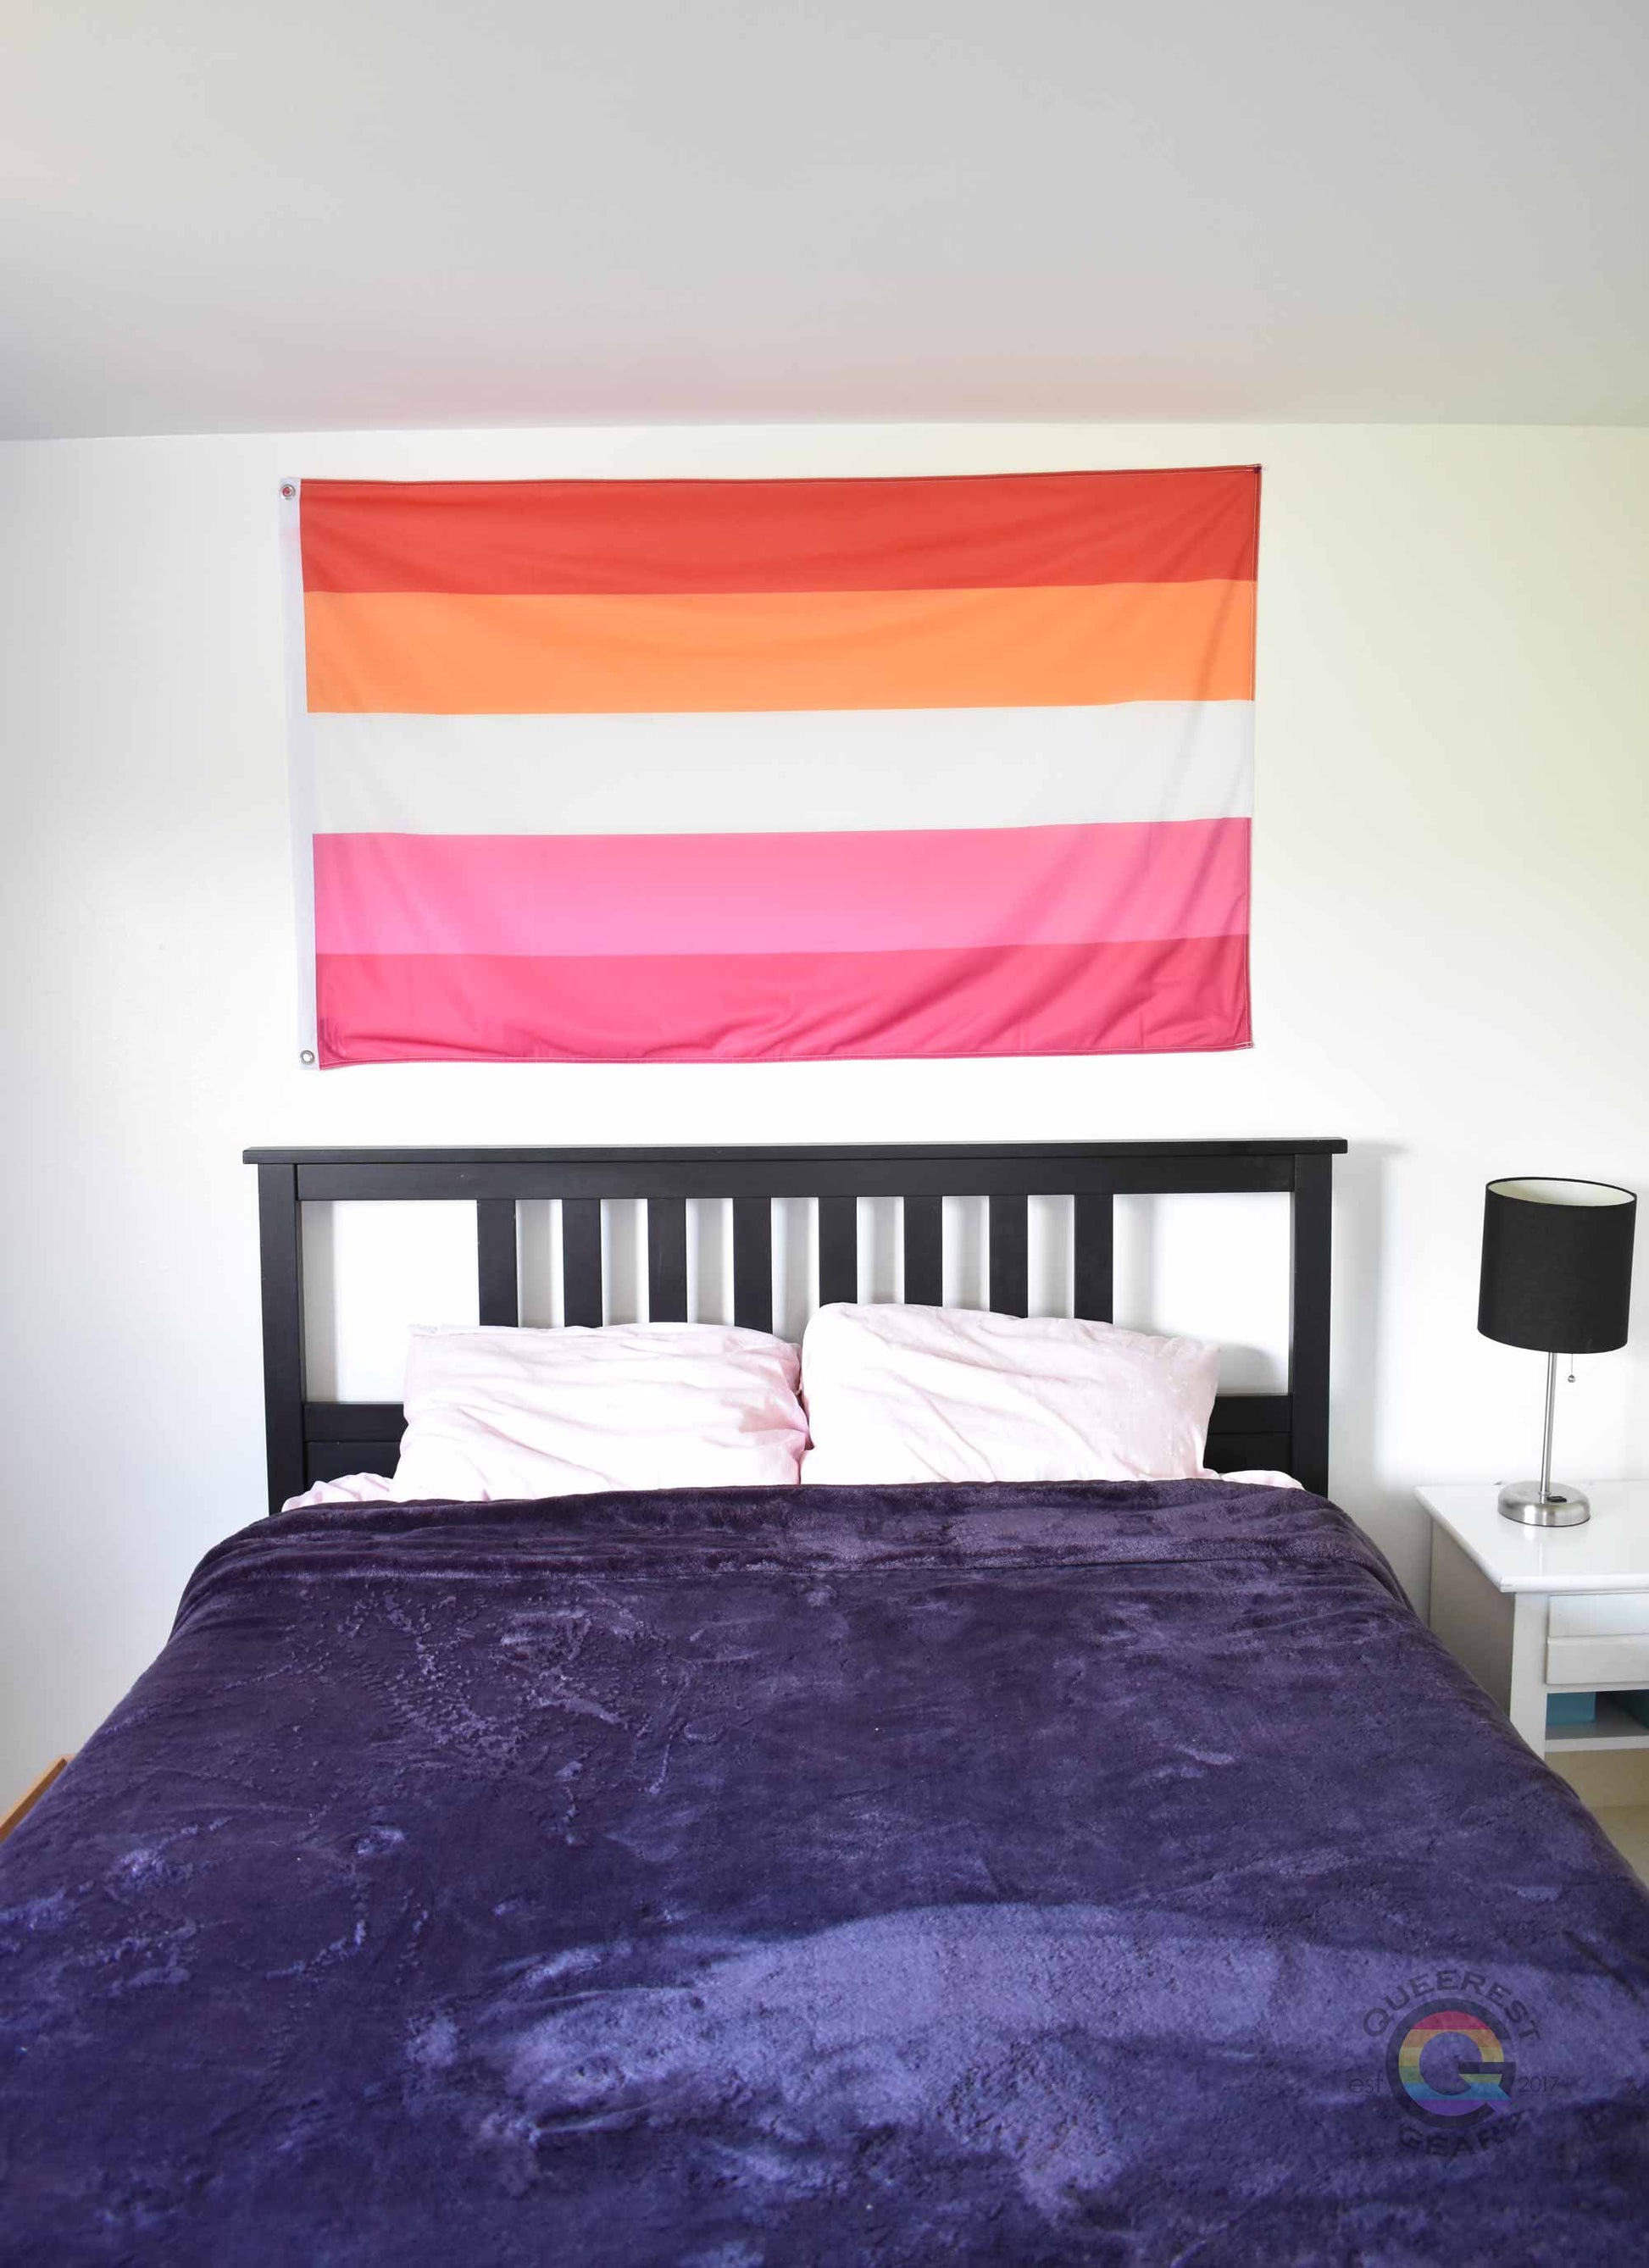 3’x5’ lesbian pride flag hanging horizontally on the wall of a bedroom centered above a bed with a purple blanket